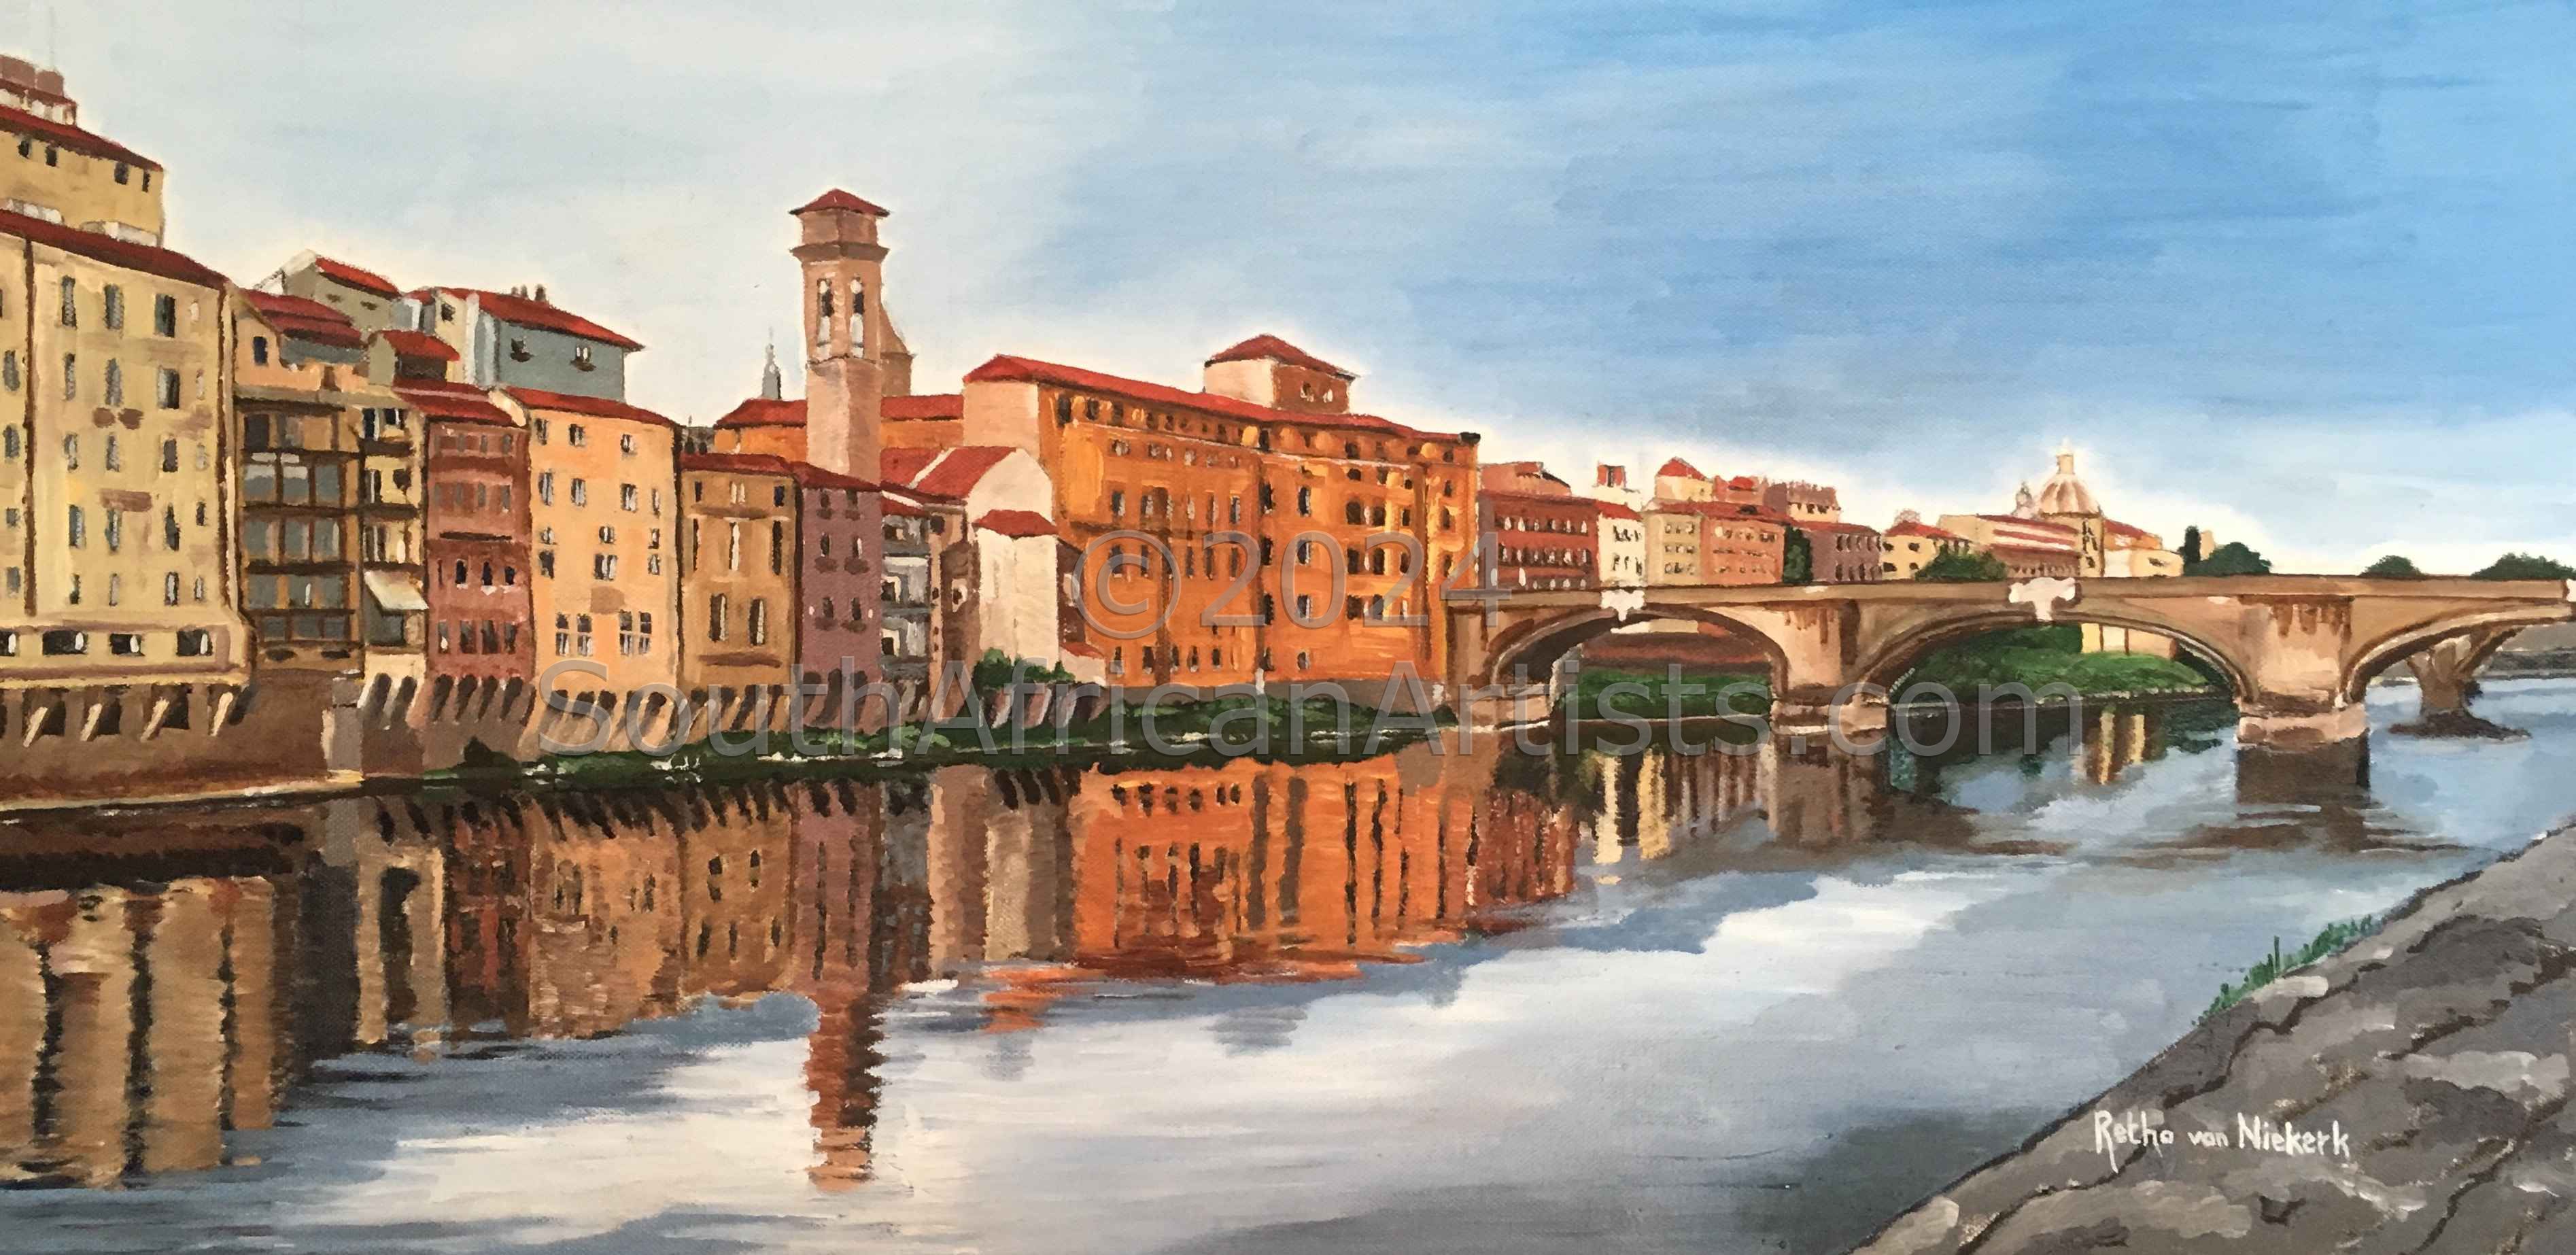 The River Arno - Florence